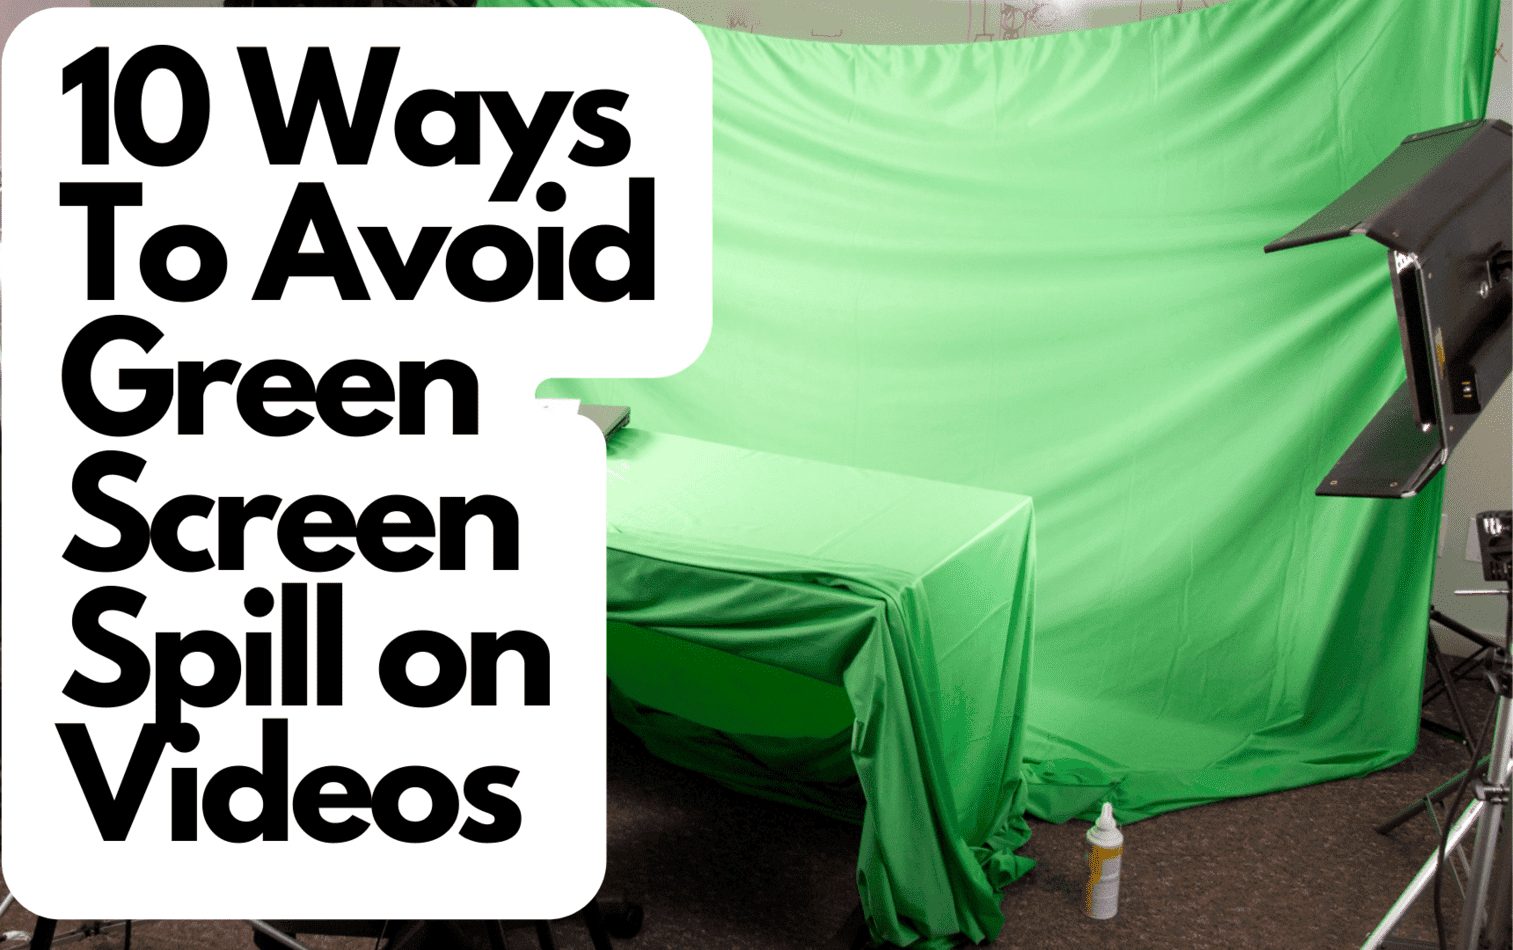 Tips On How To Avoid Green Screen Flickering